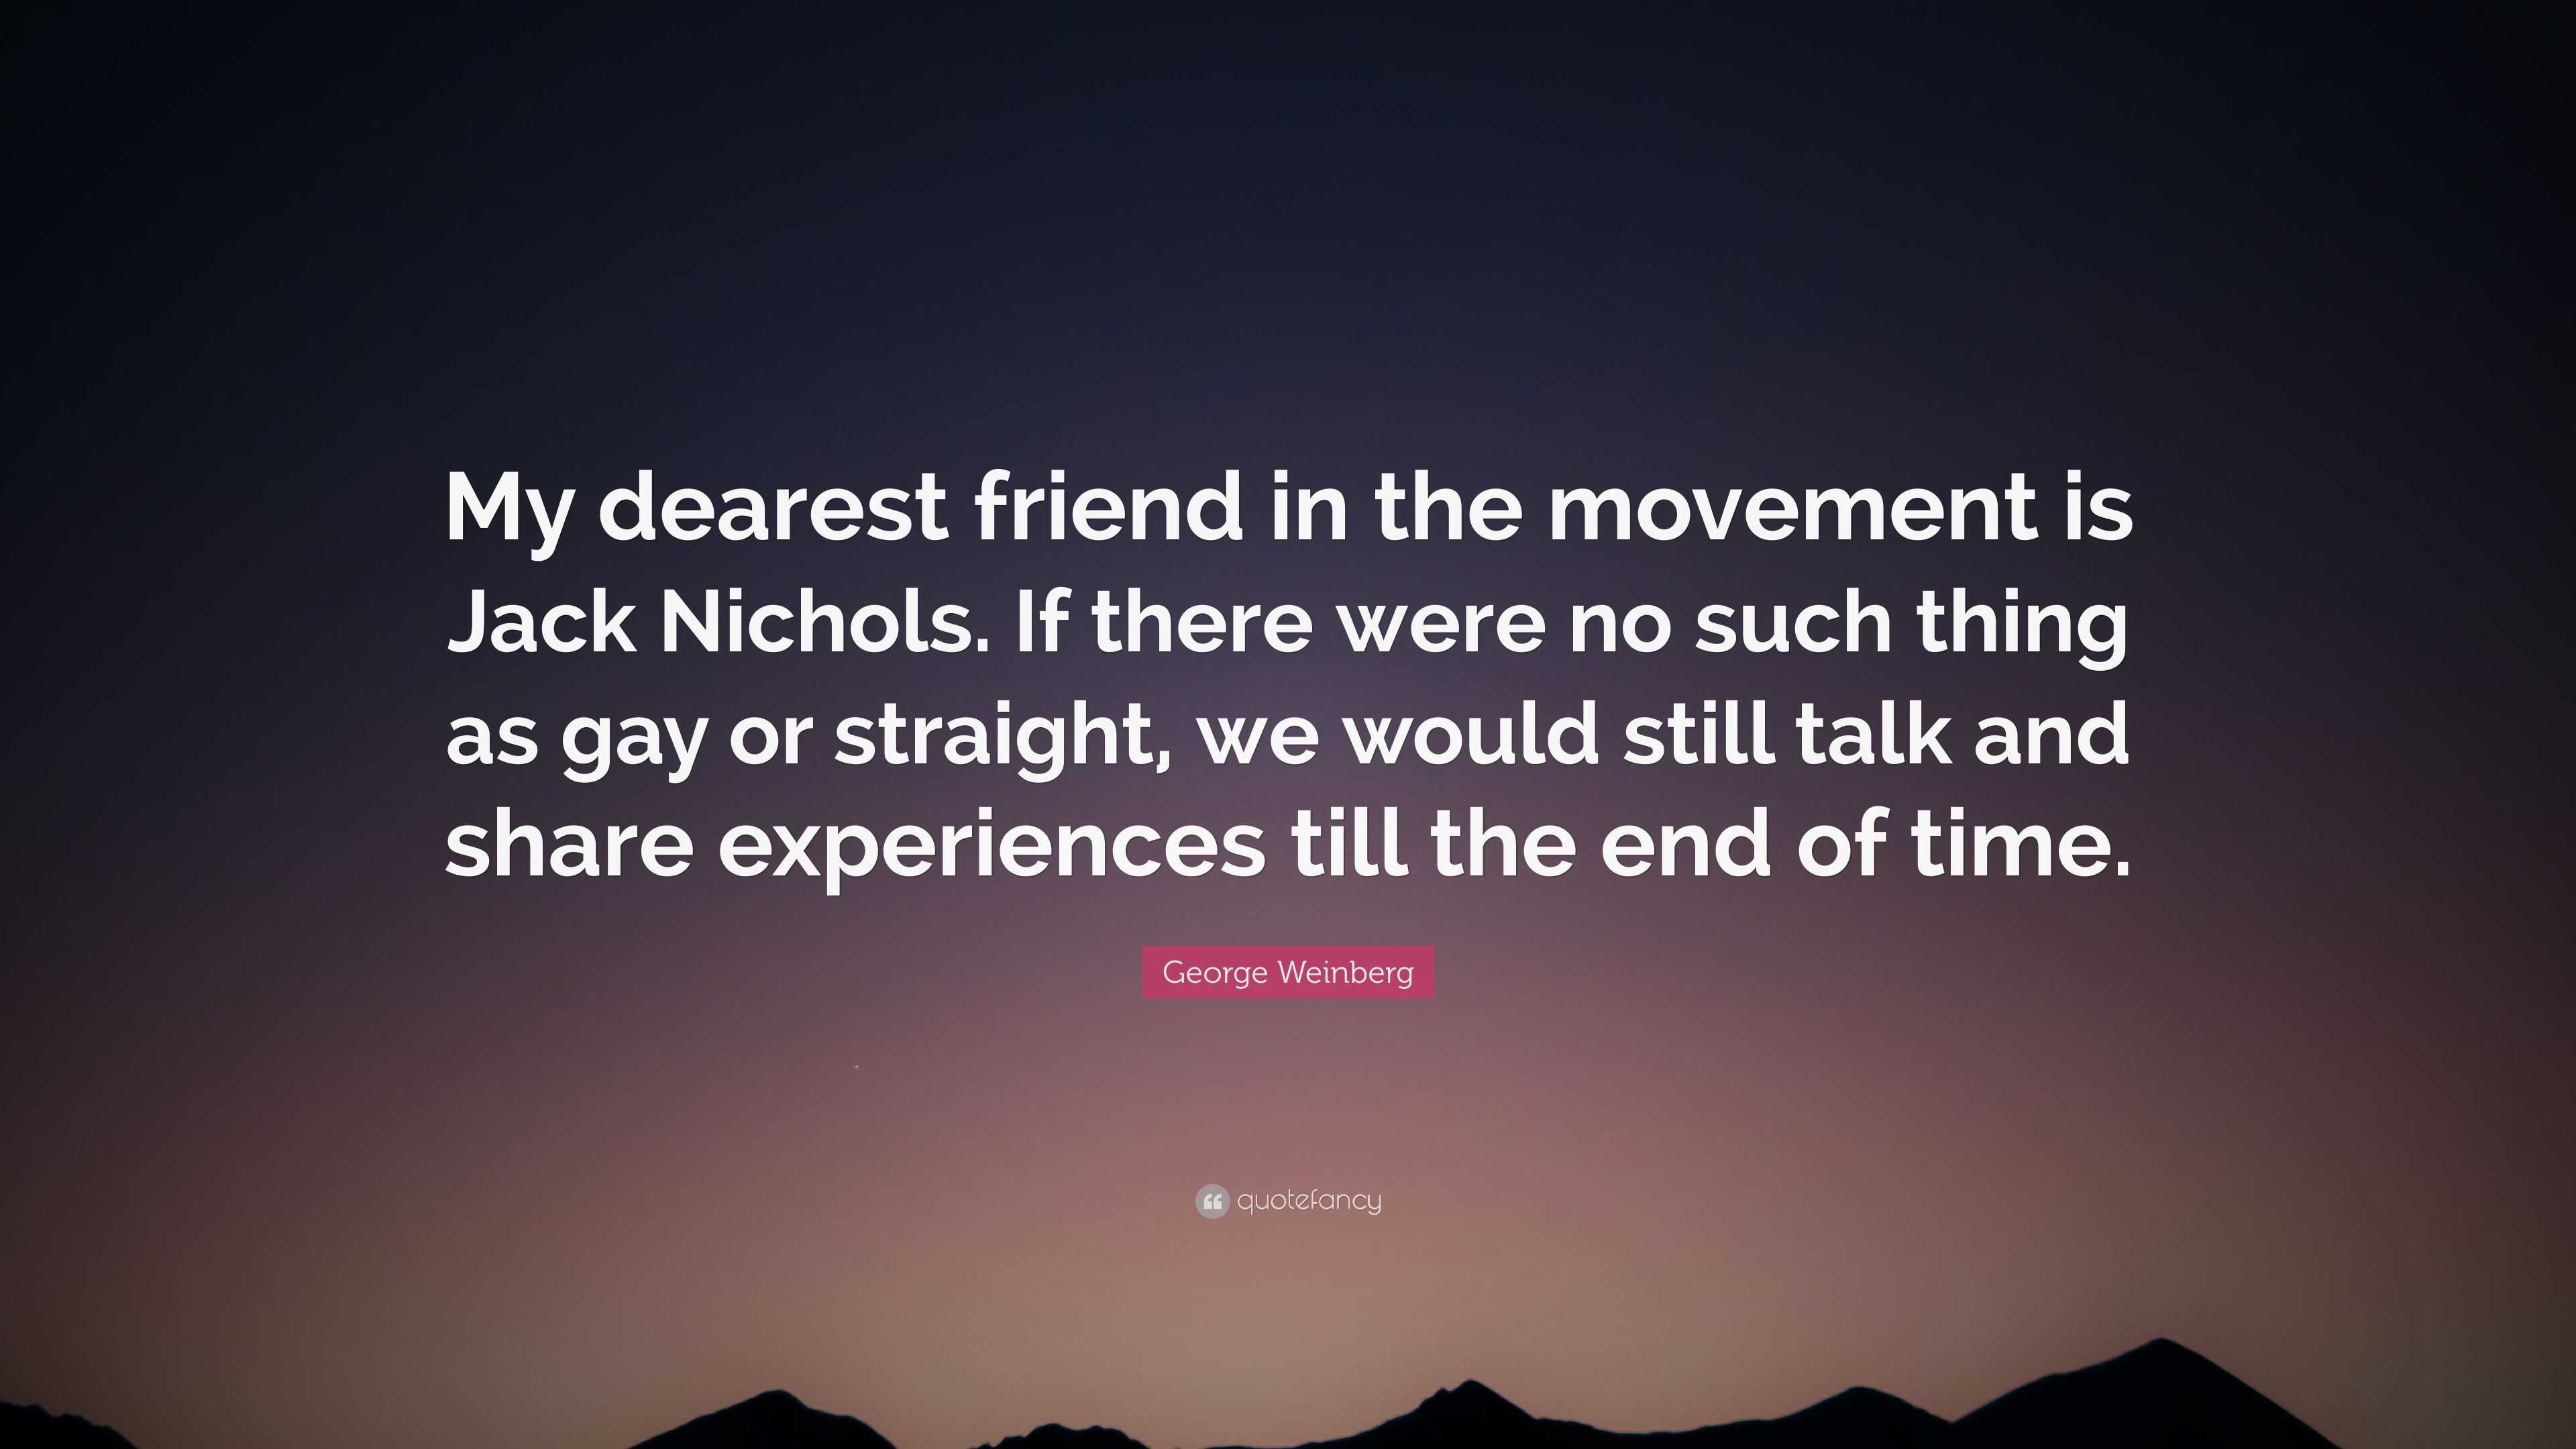 George Weinberg Quote My Dearest Friend In The Movement Is Jack Nichols If There Were No Such Thing As Gay Or Straight We Would Still Talk A